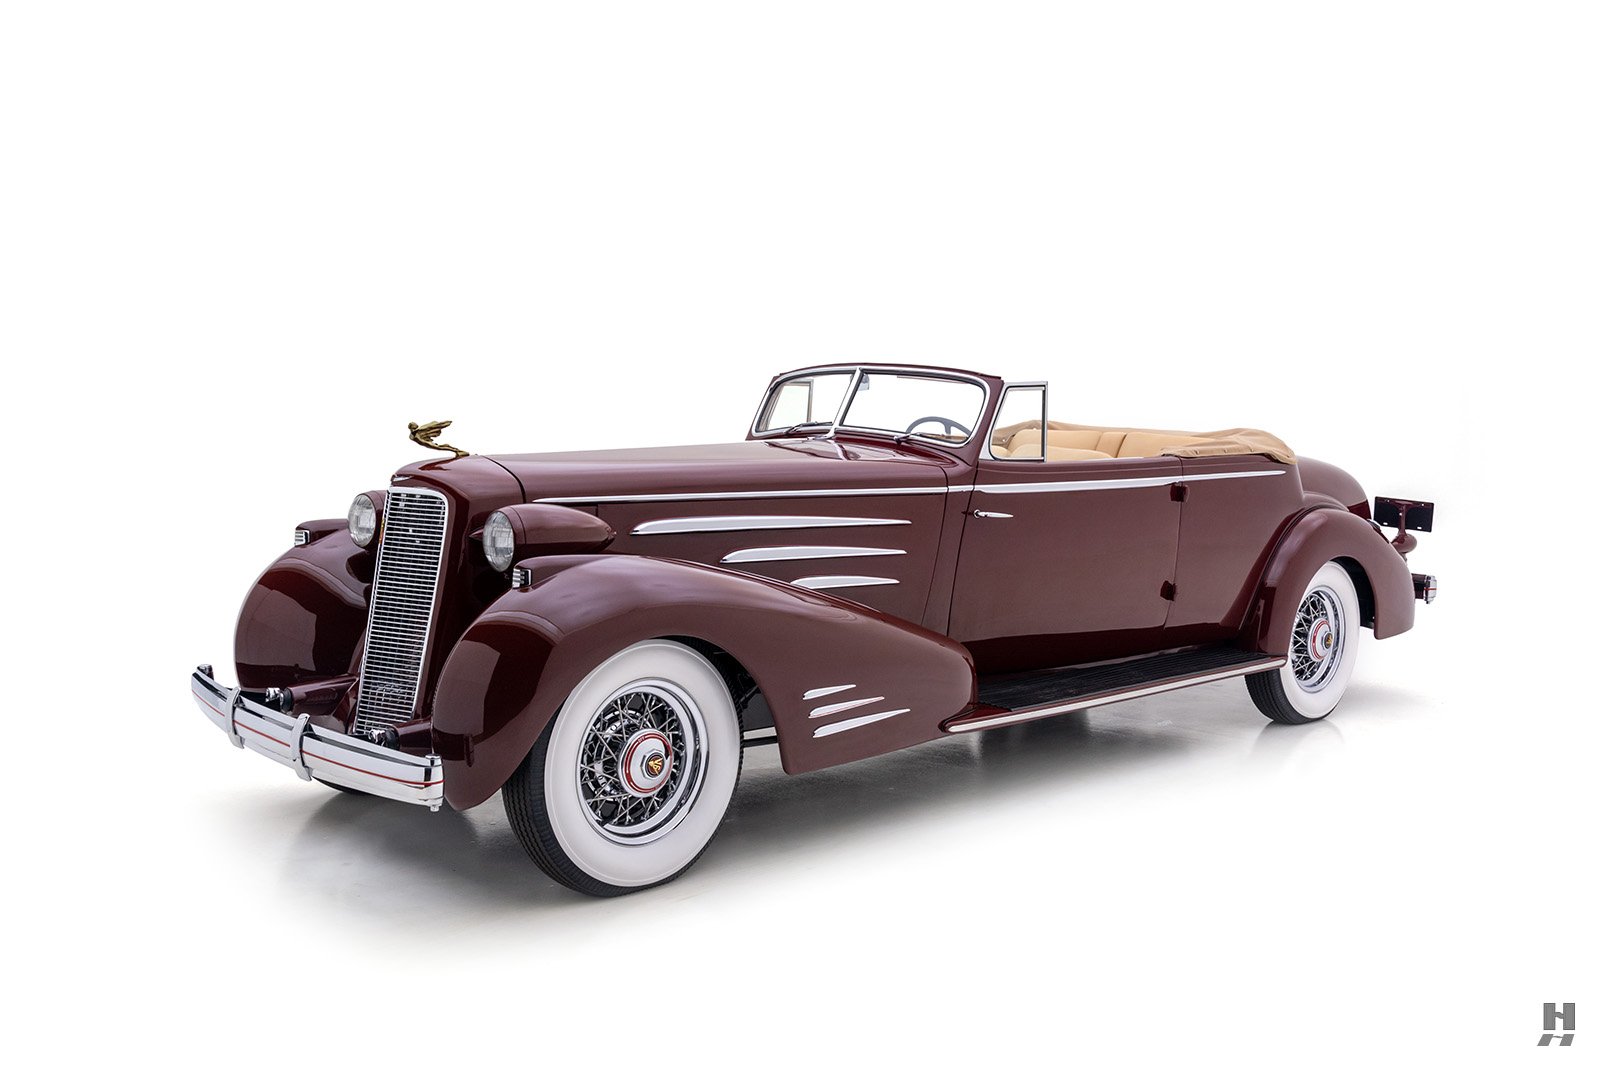 1935 Cadillac V16 For Sale | Vintage Driving Machines